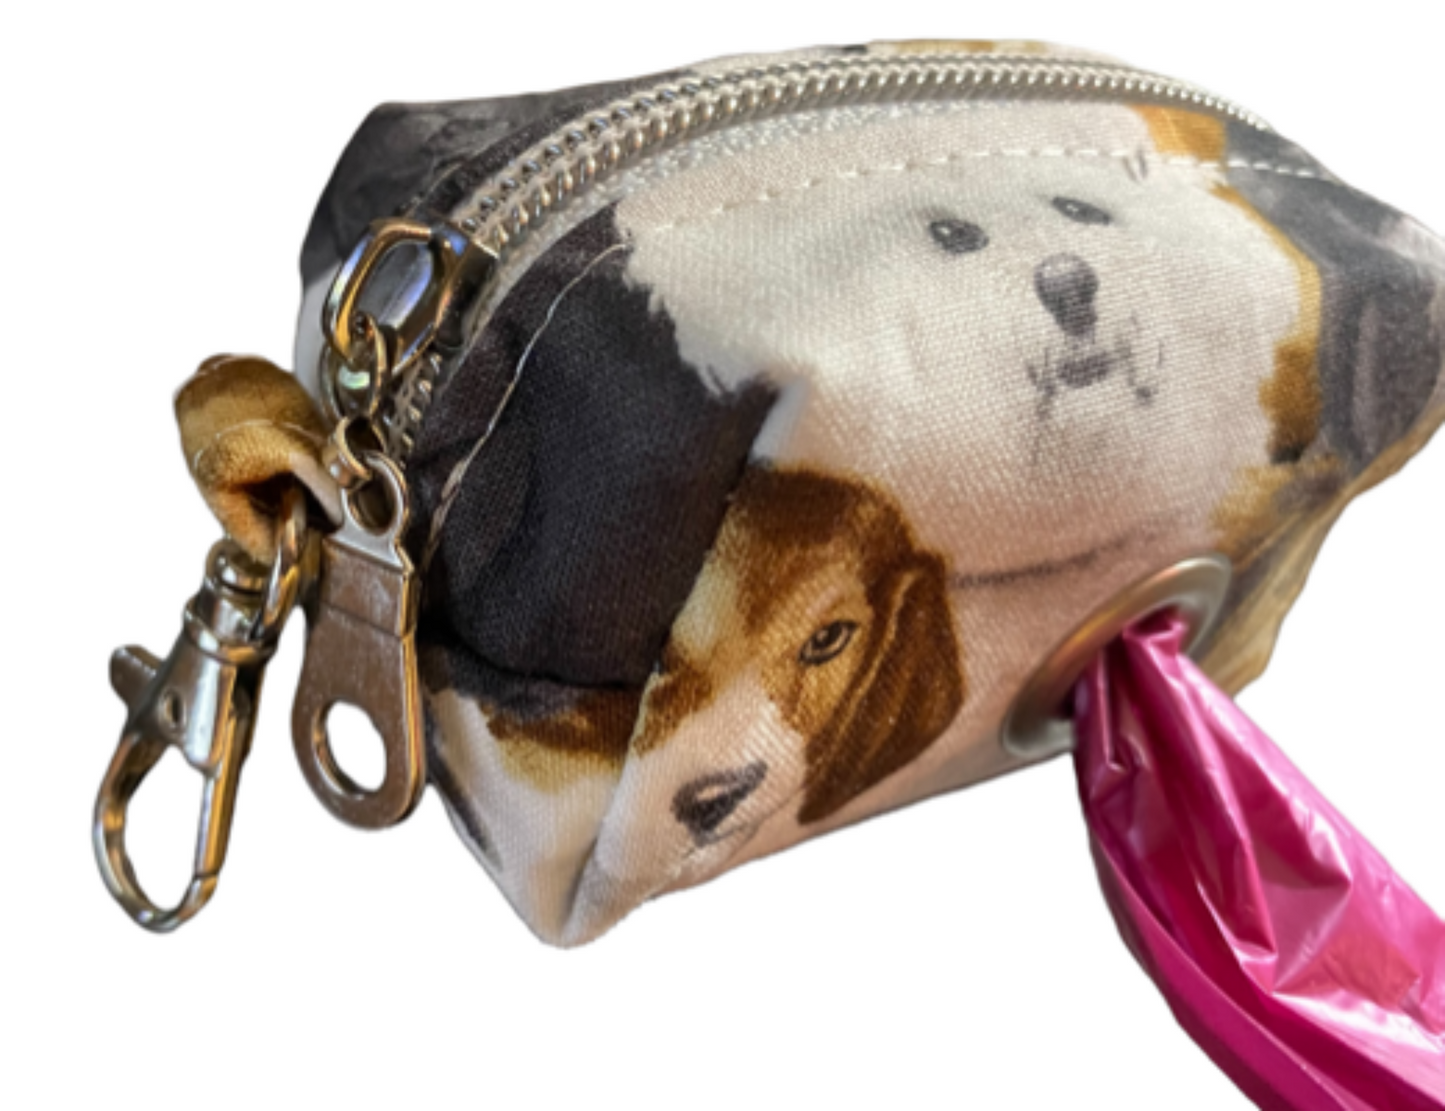 Doggie Poop Bag Holder with Swivel Clasp